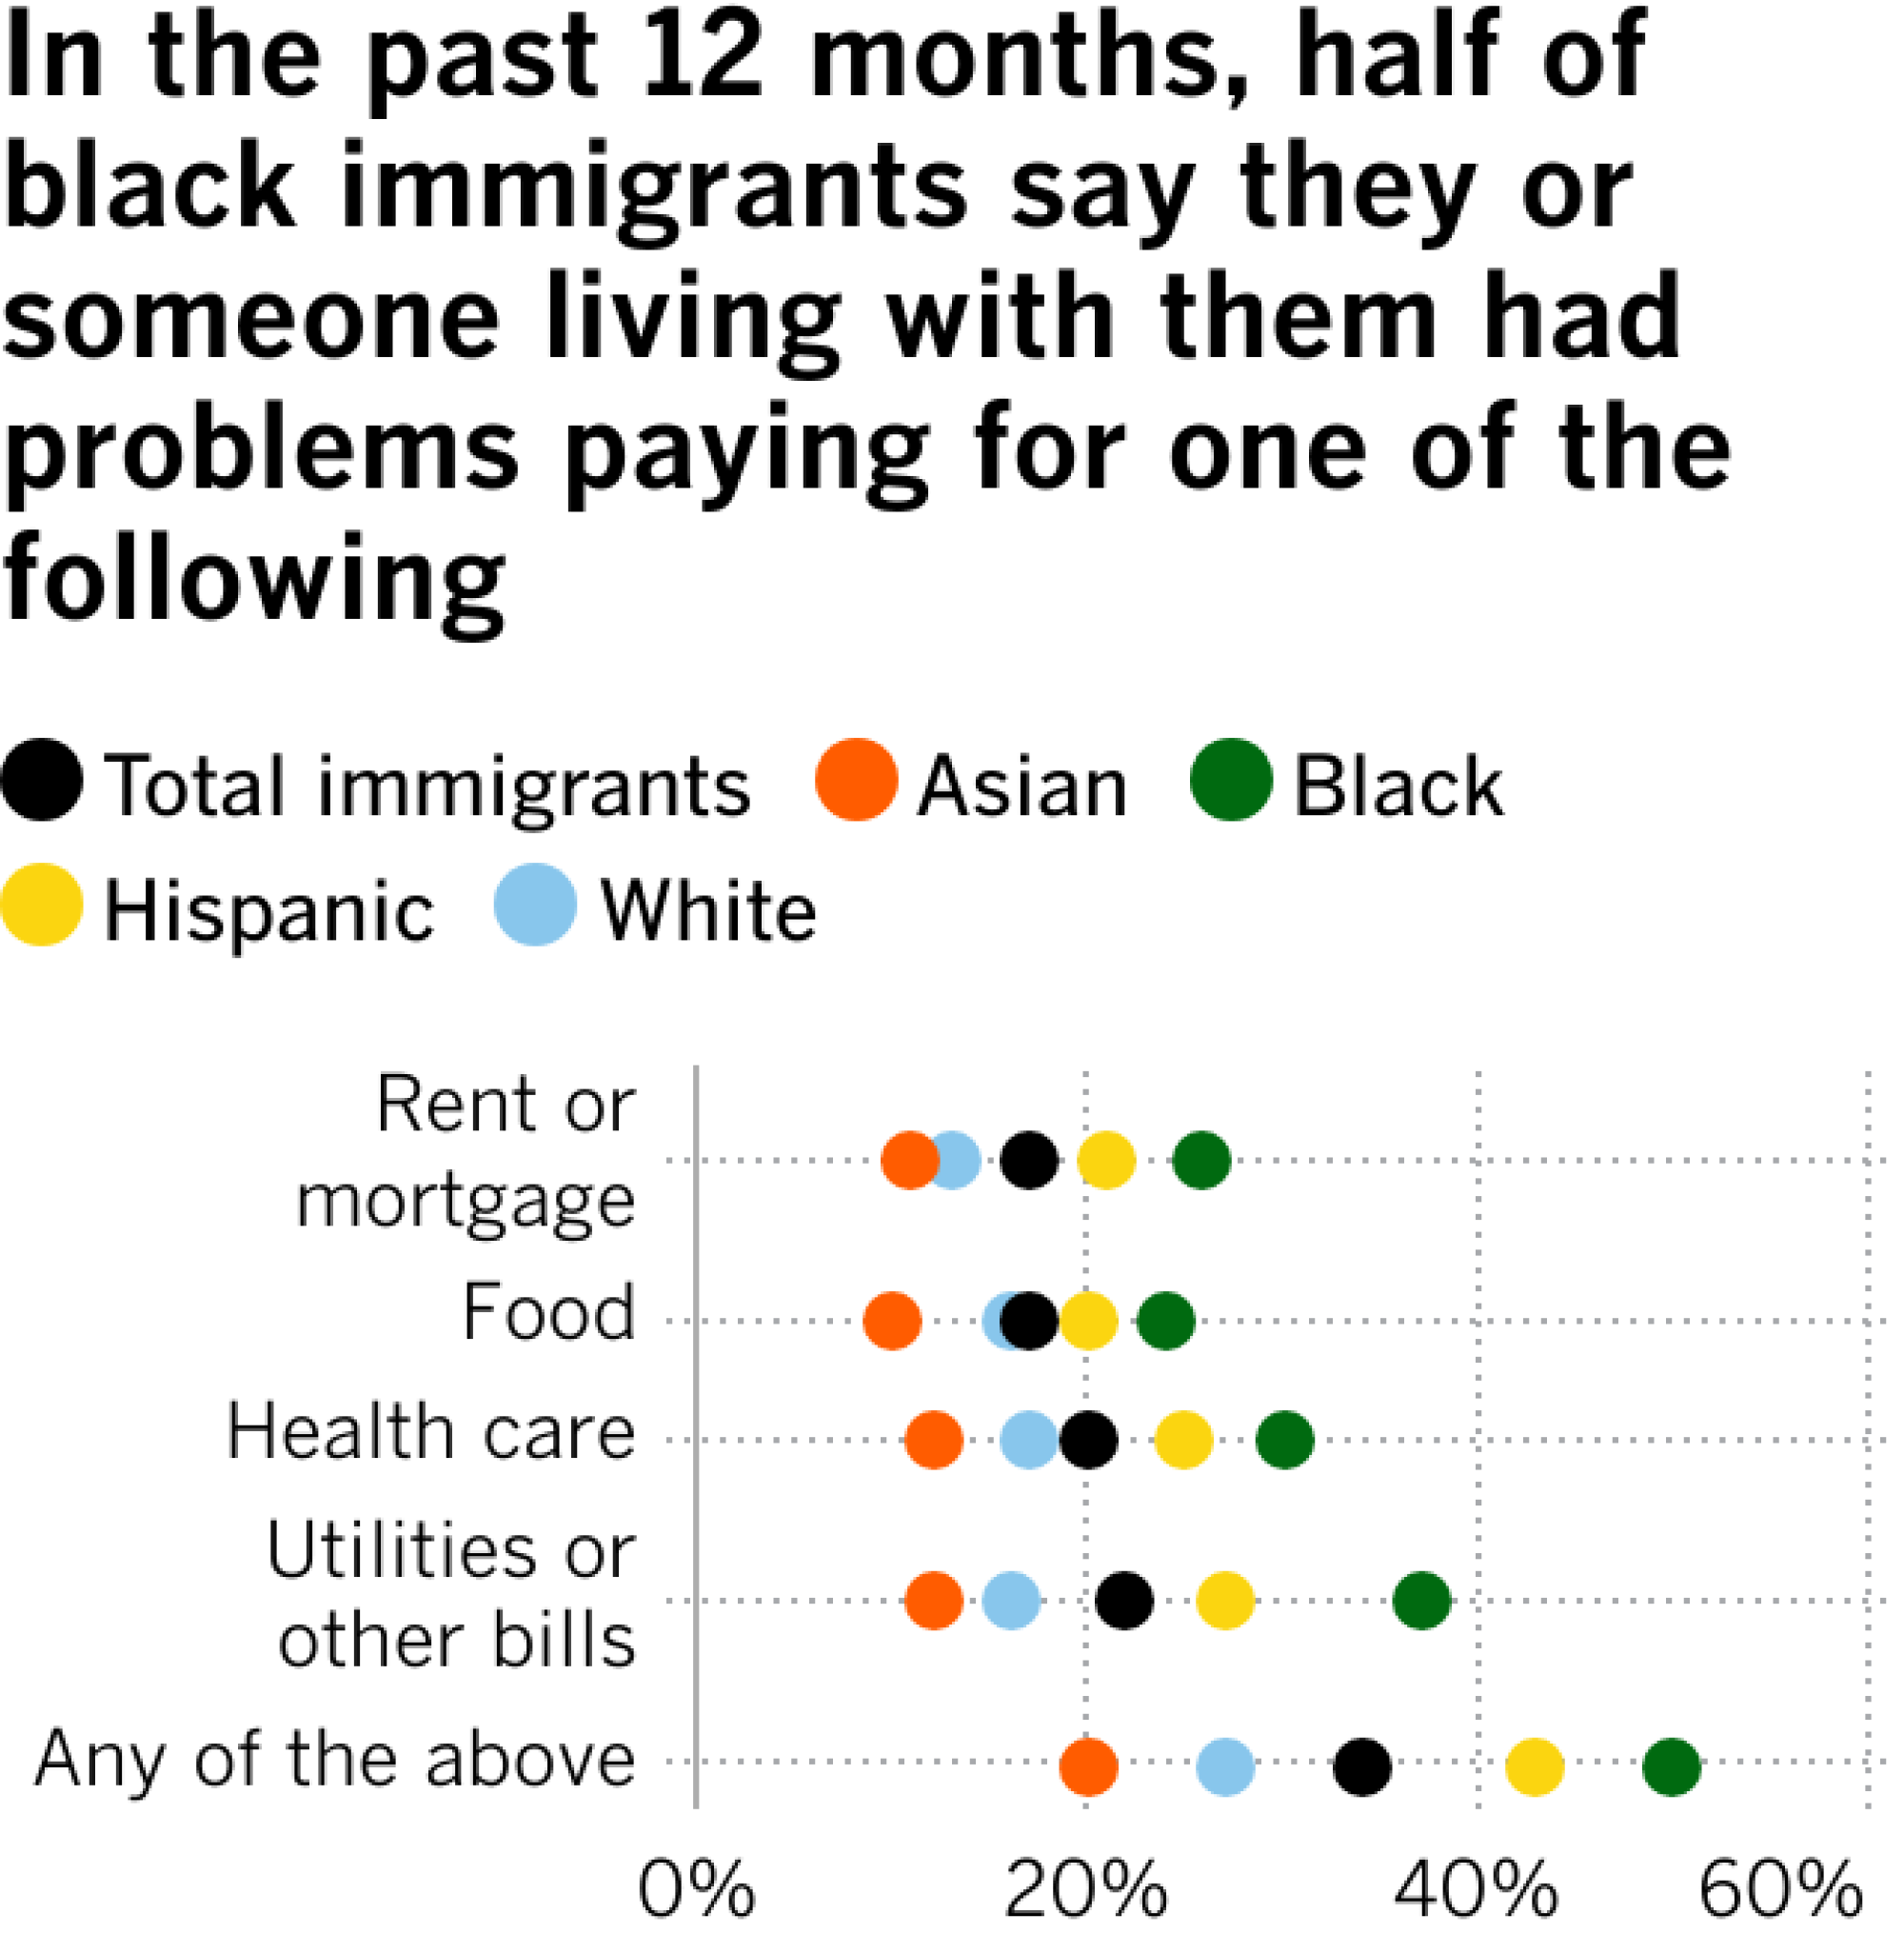 In the past 12 months, half of black immigrants say they or someone living with them had problems paying for one of the following